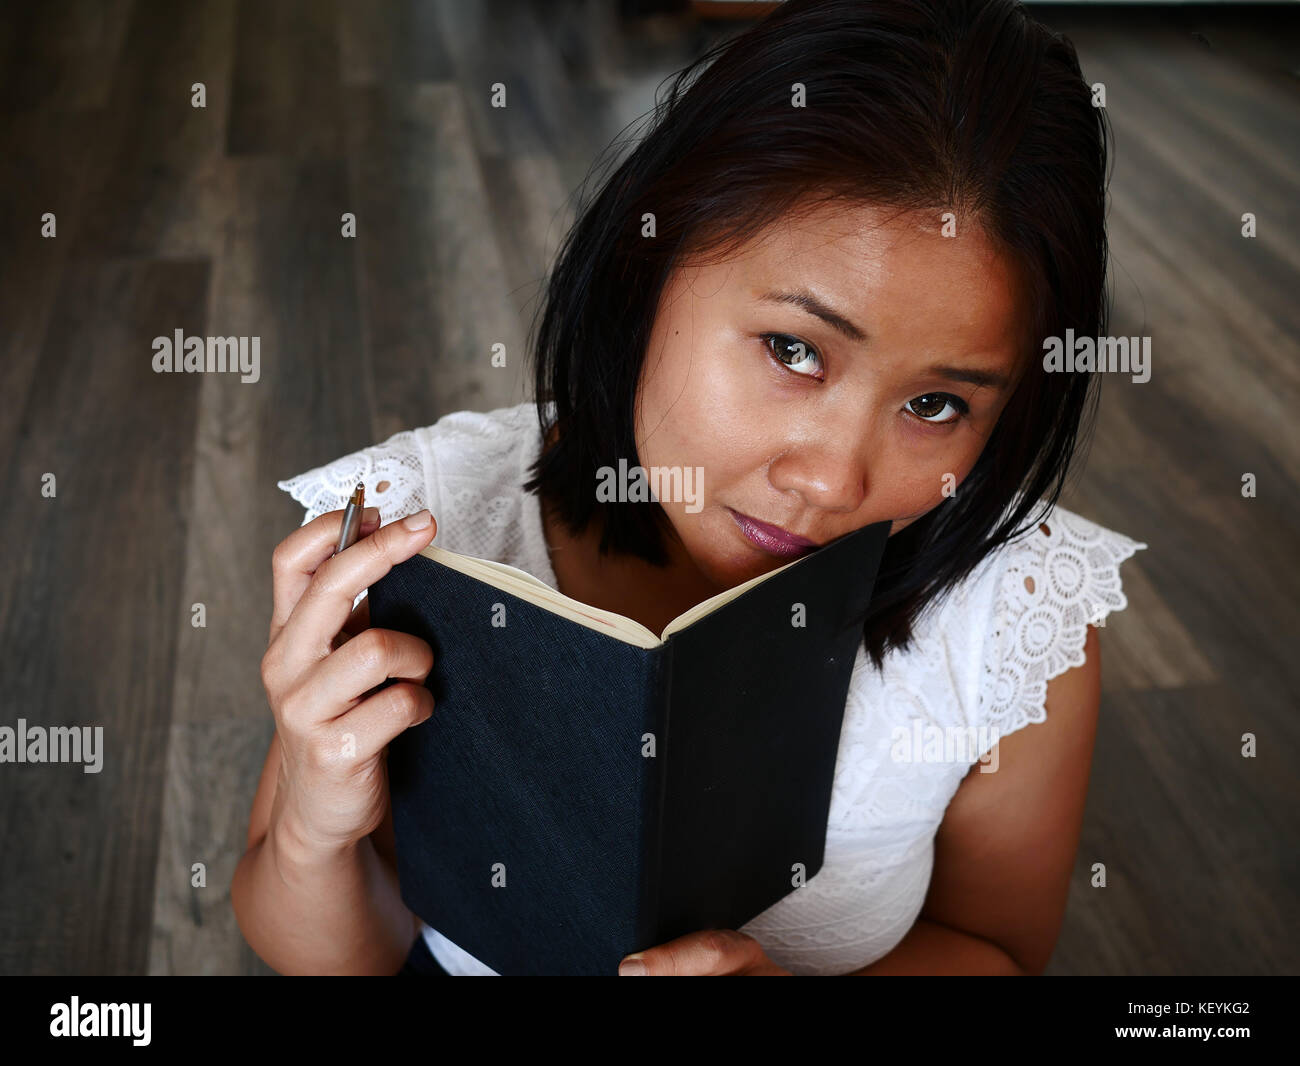 Woman holding a notebook and a pen, planing to write Stock Photo